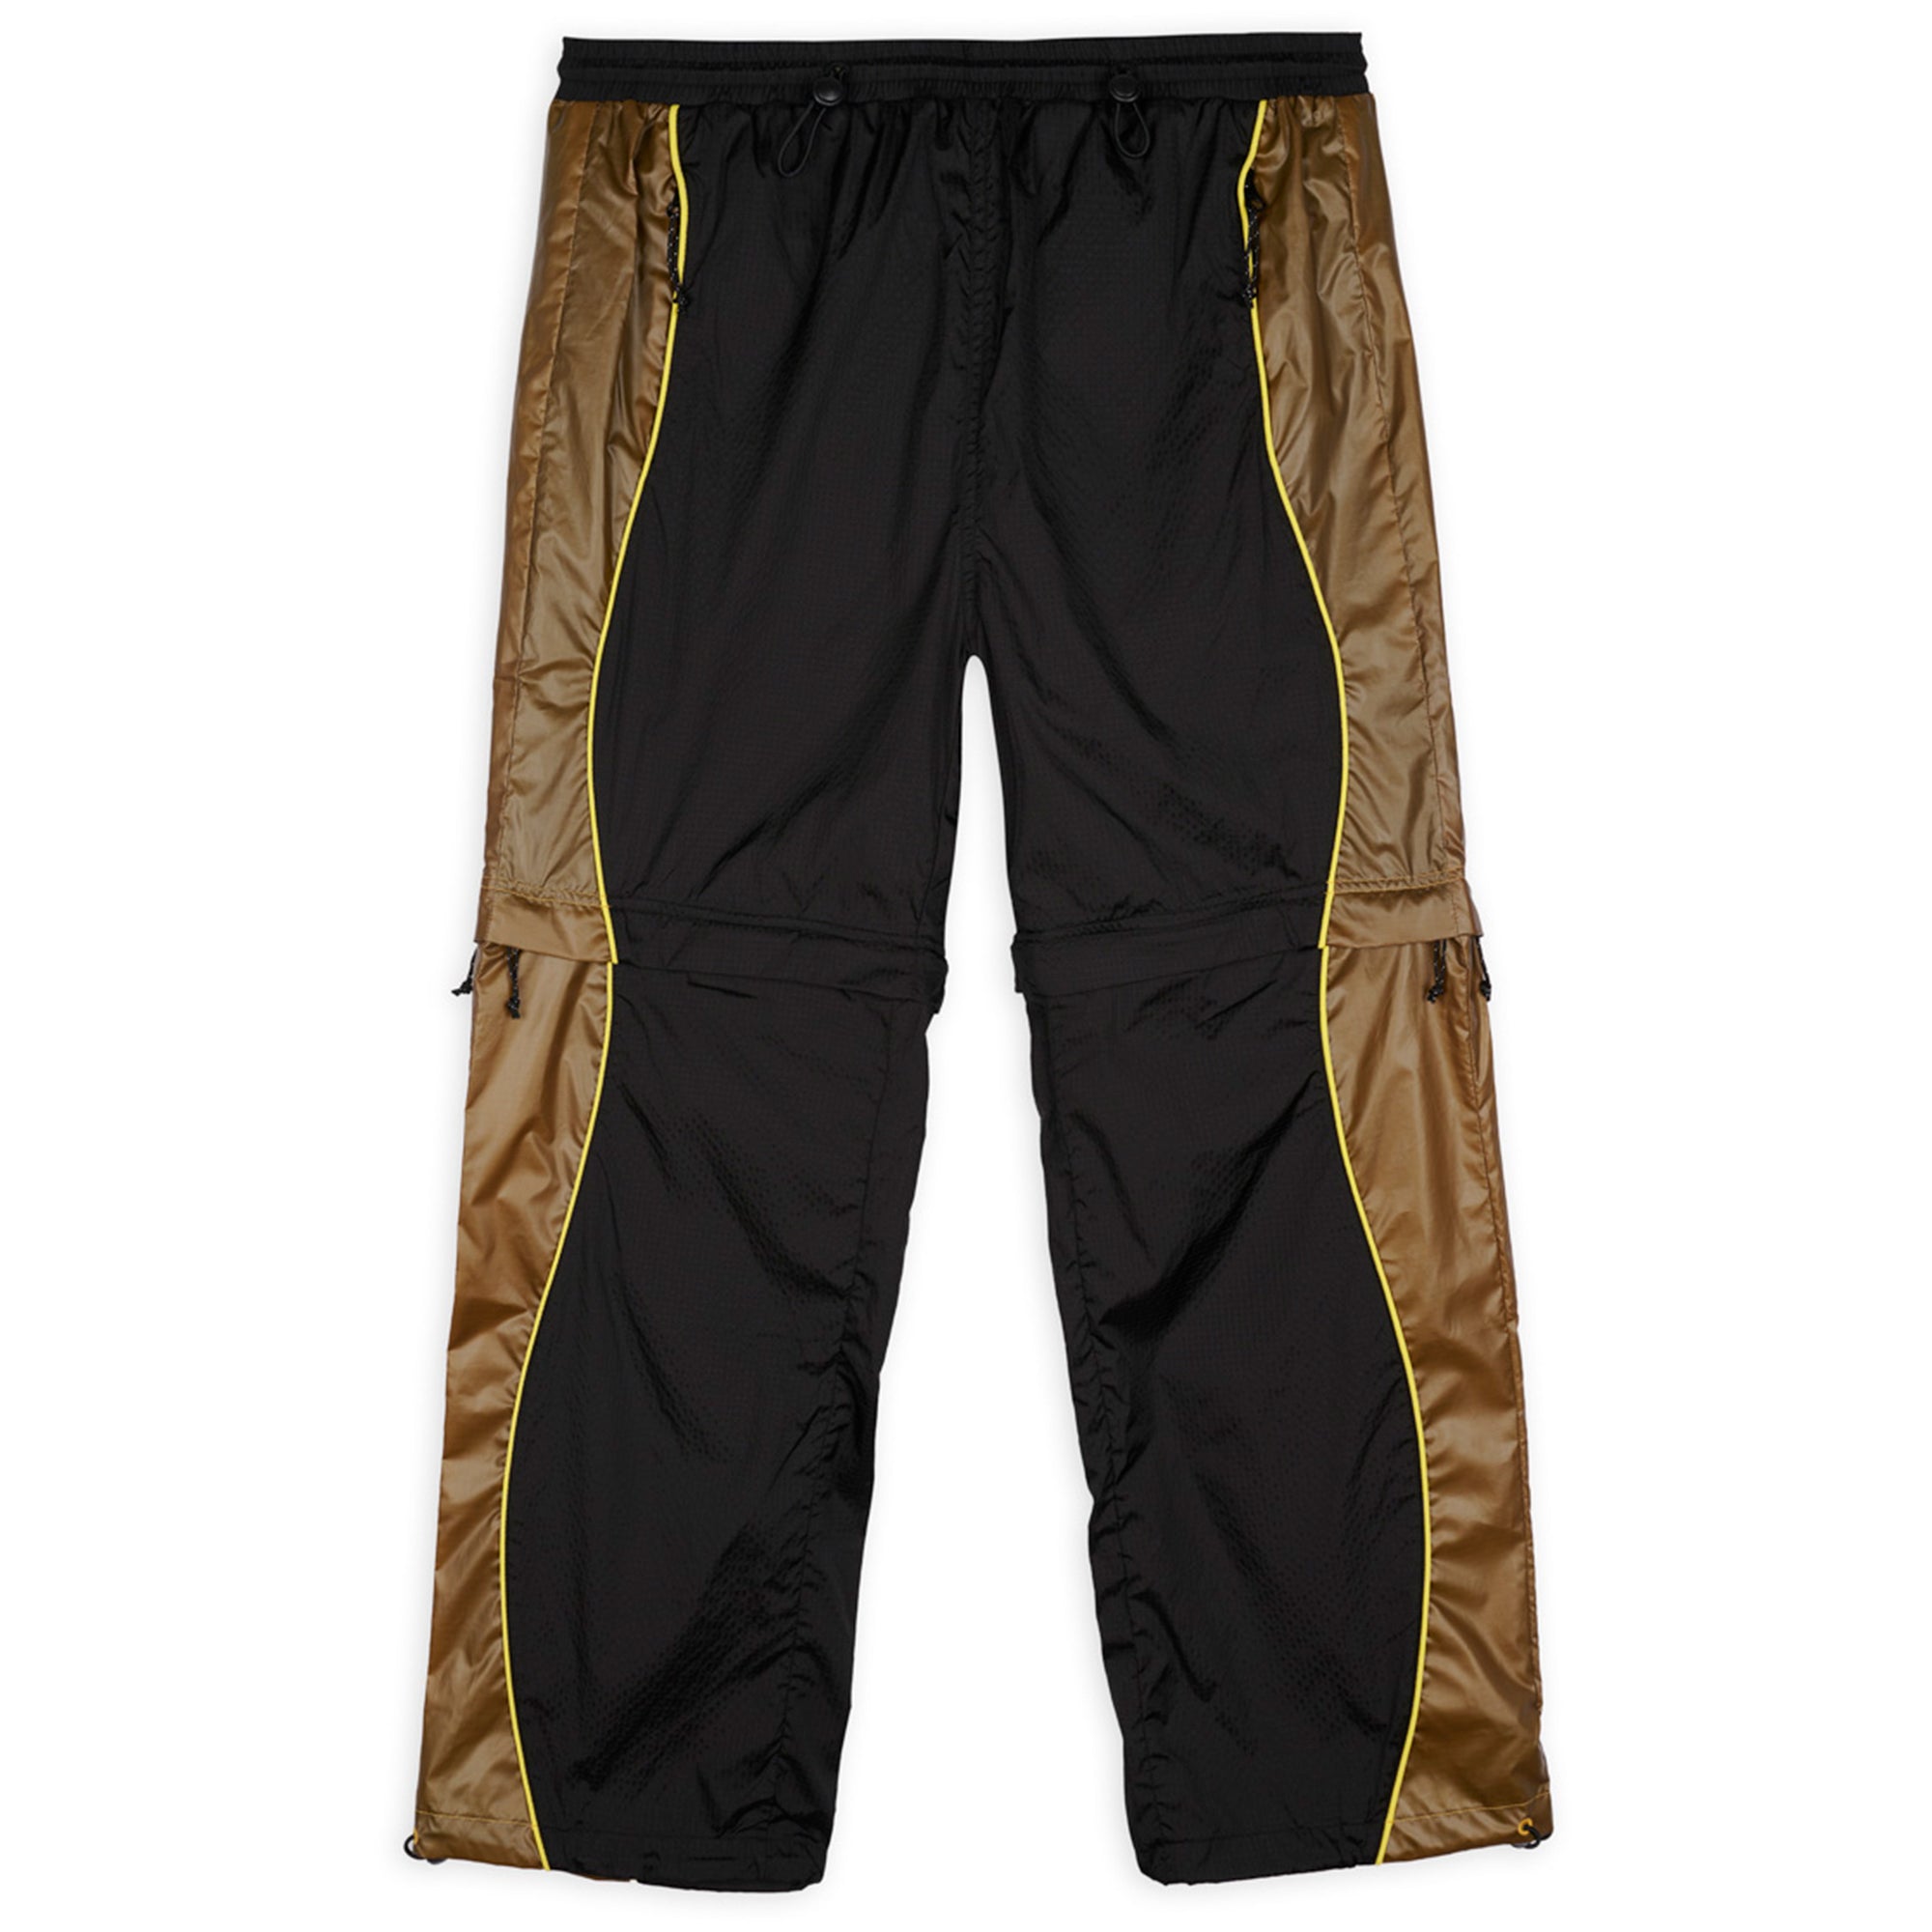 Brain Dead - Thermo Heat Zip Off Running Pant - (Thermo Reactive) view 1